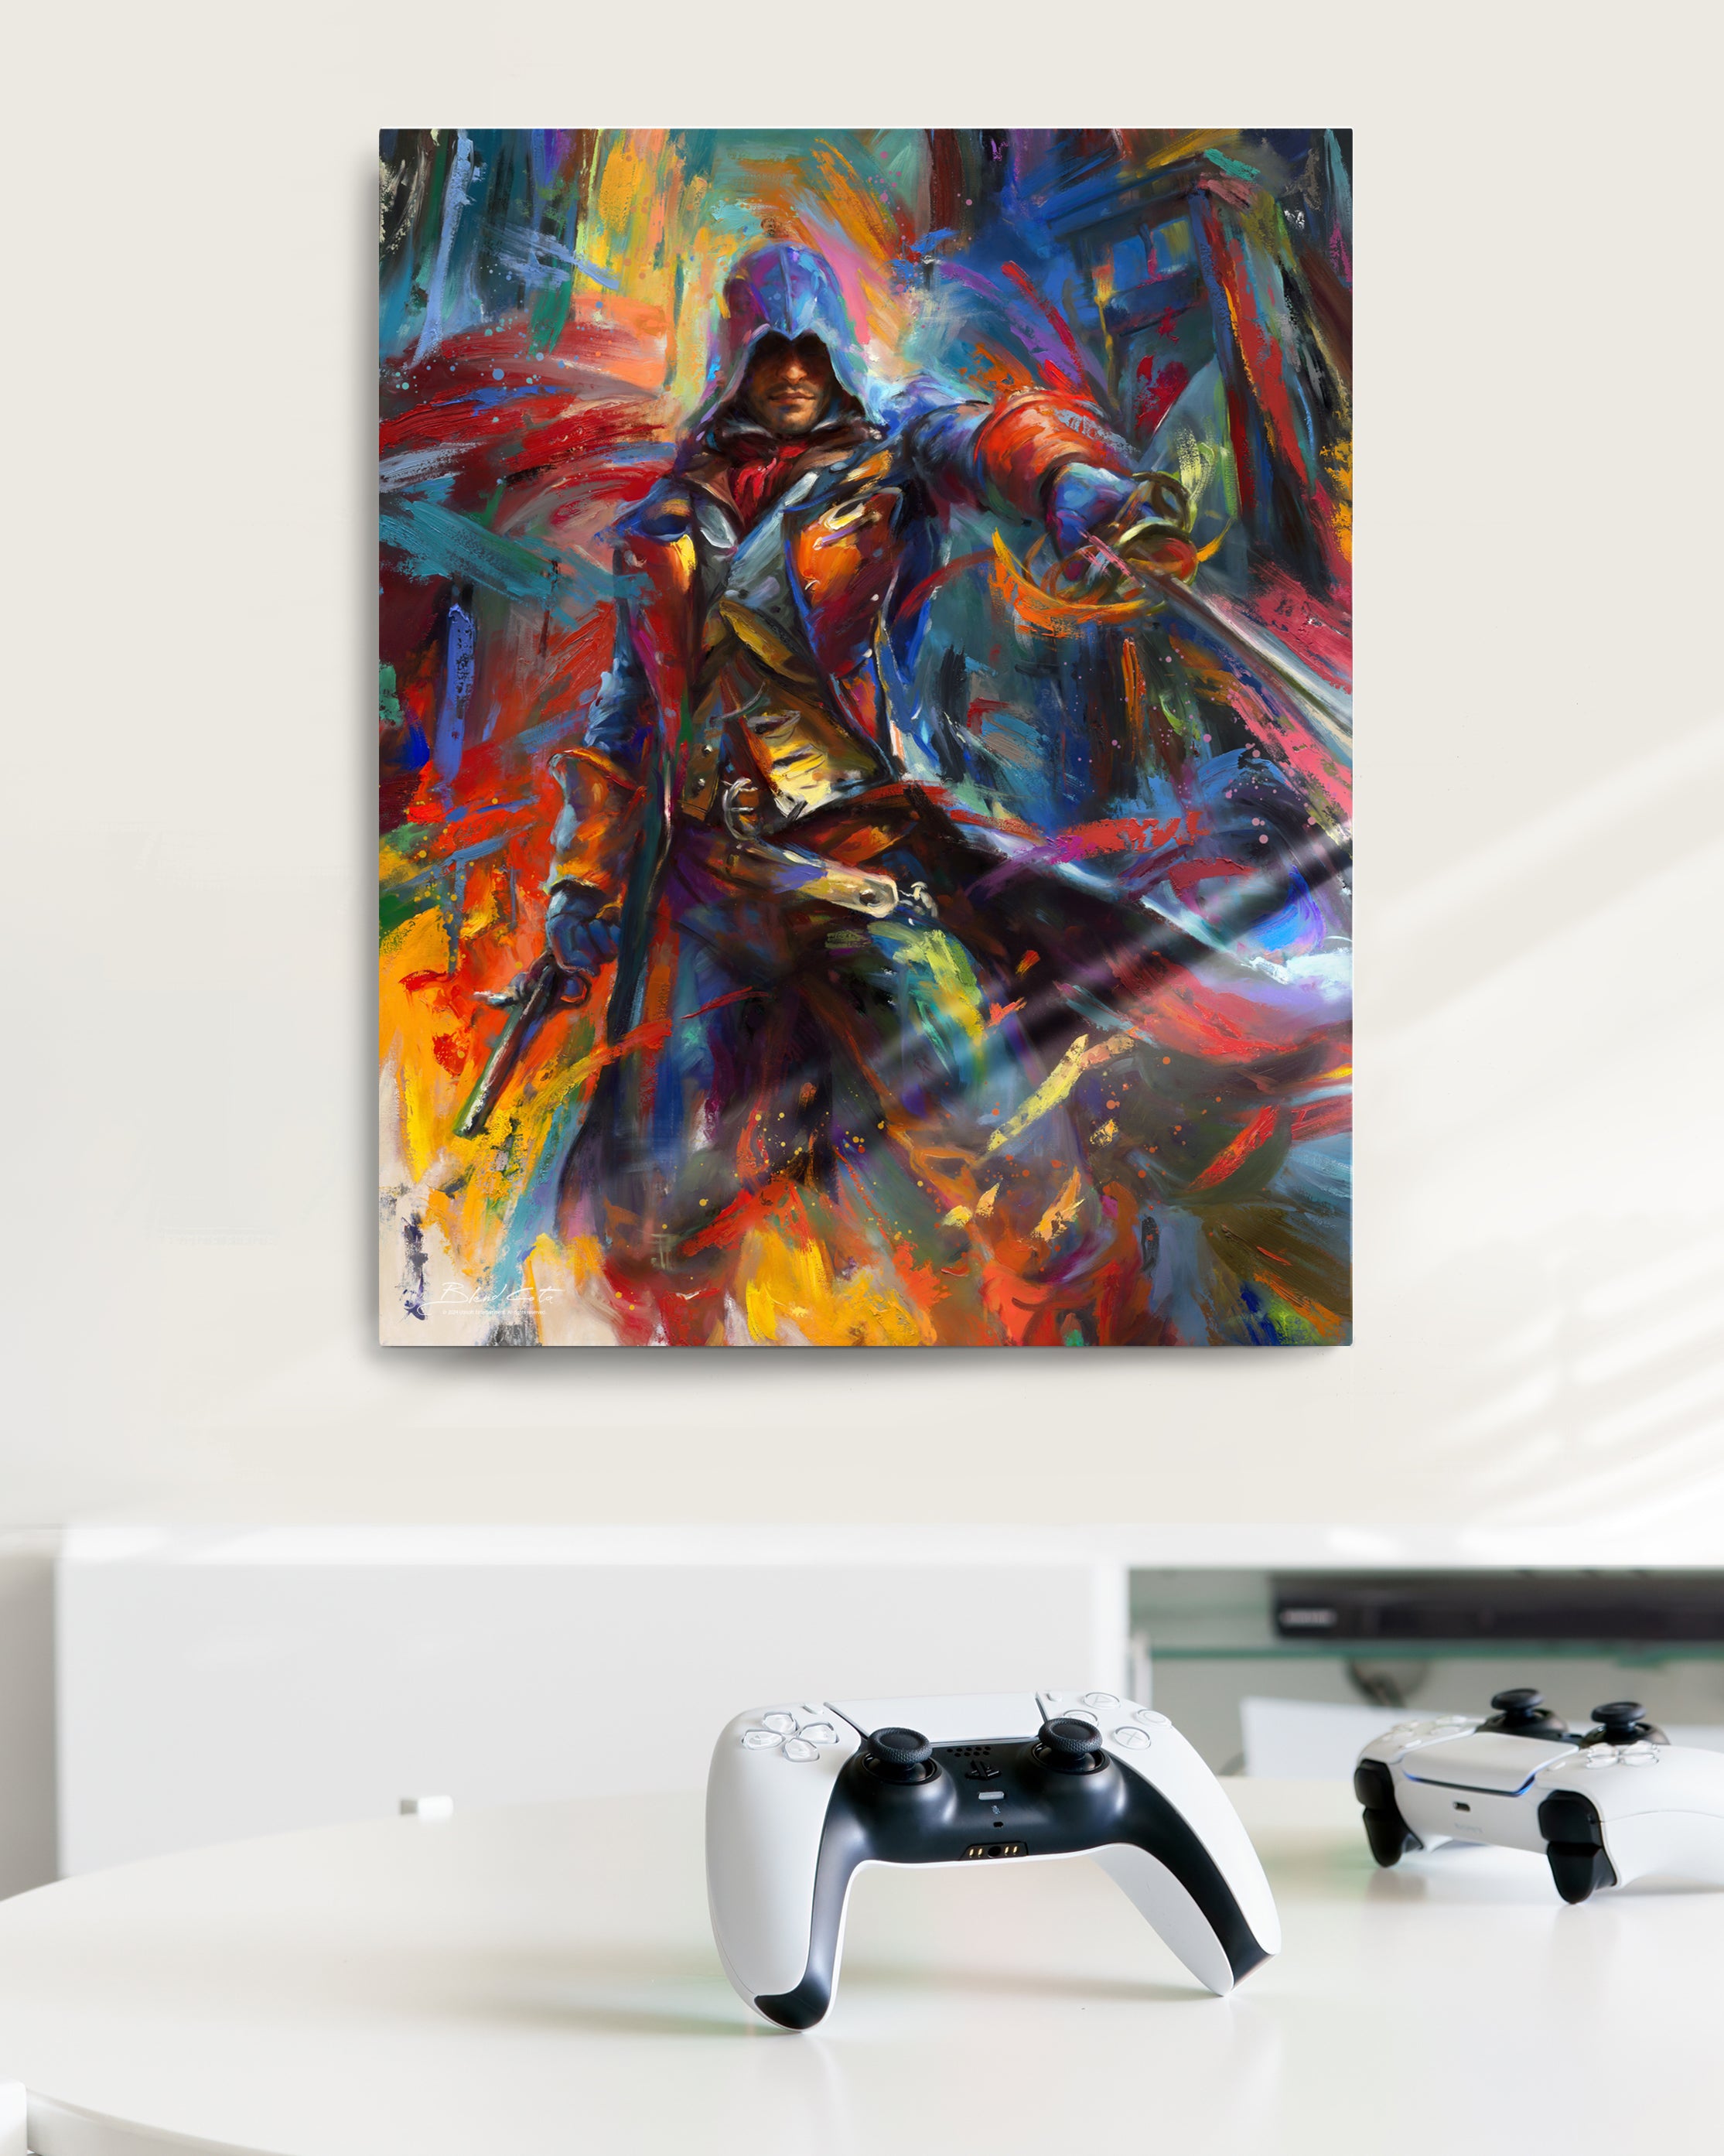 Limited Edition glossy metal print of Assassin's Creed Arno Dorian of Unity bursting forth with energy and painted with colorful brushstrokes in an expressionistic style in a room setting.